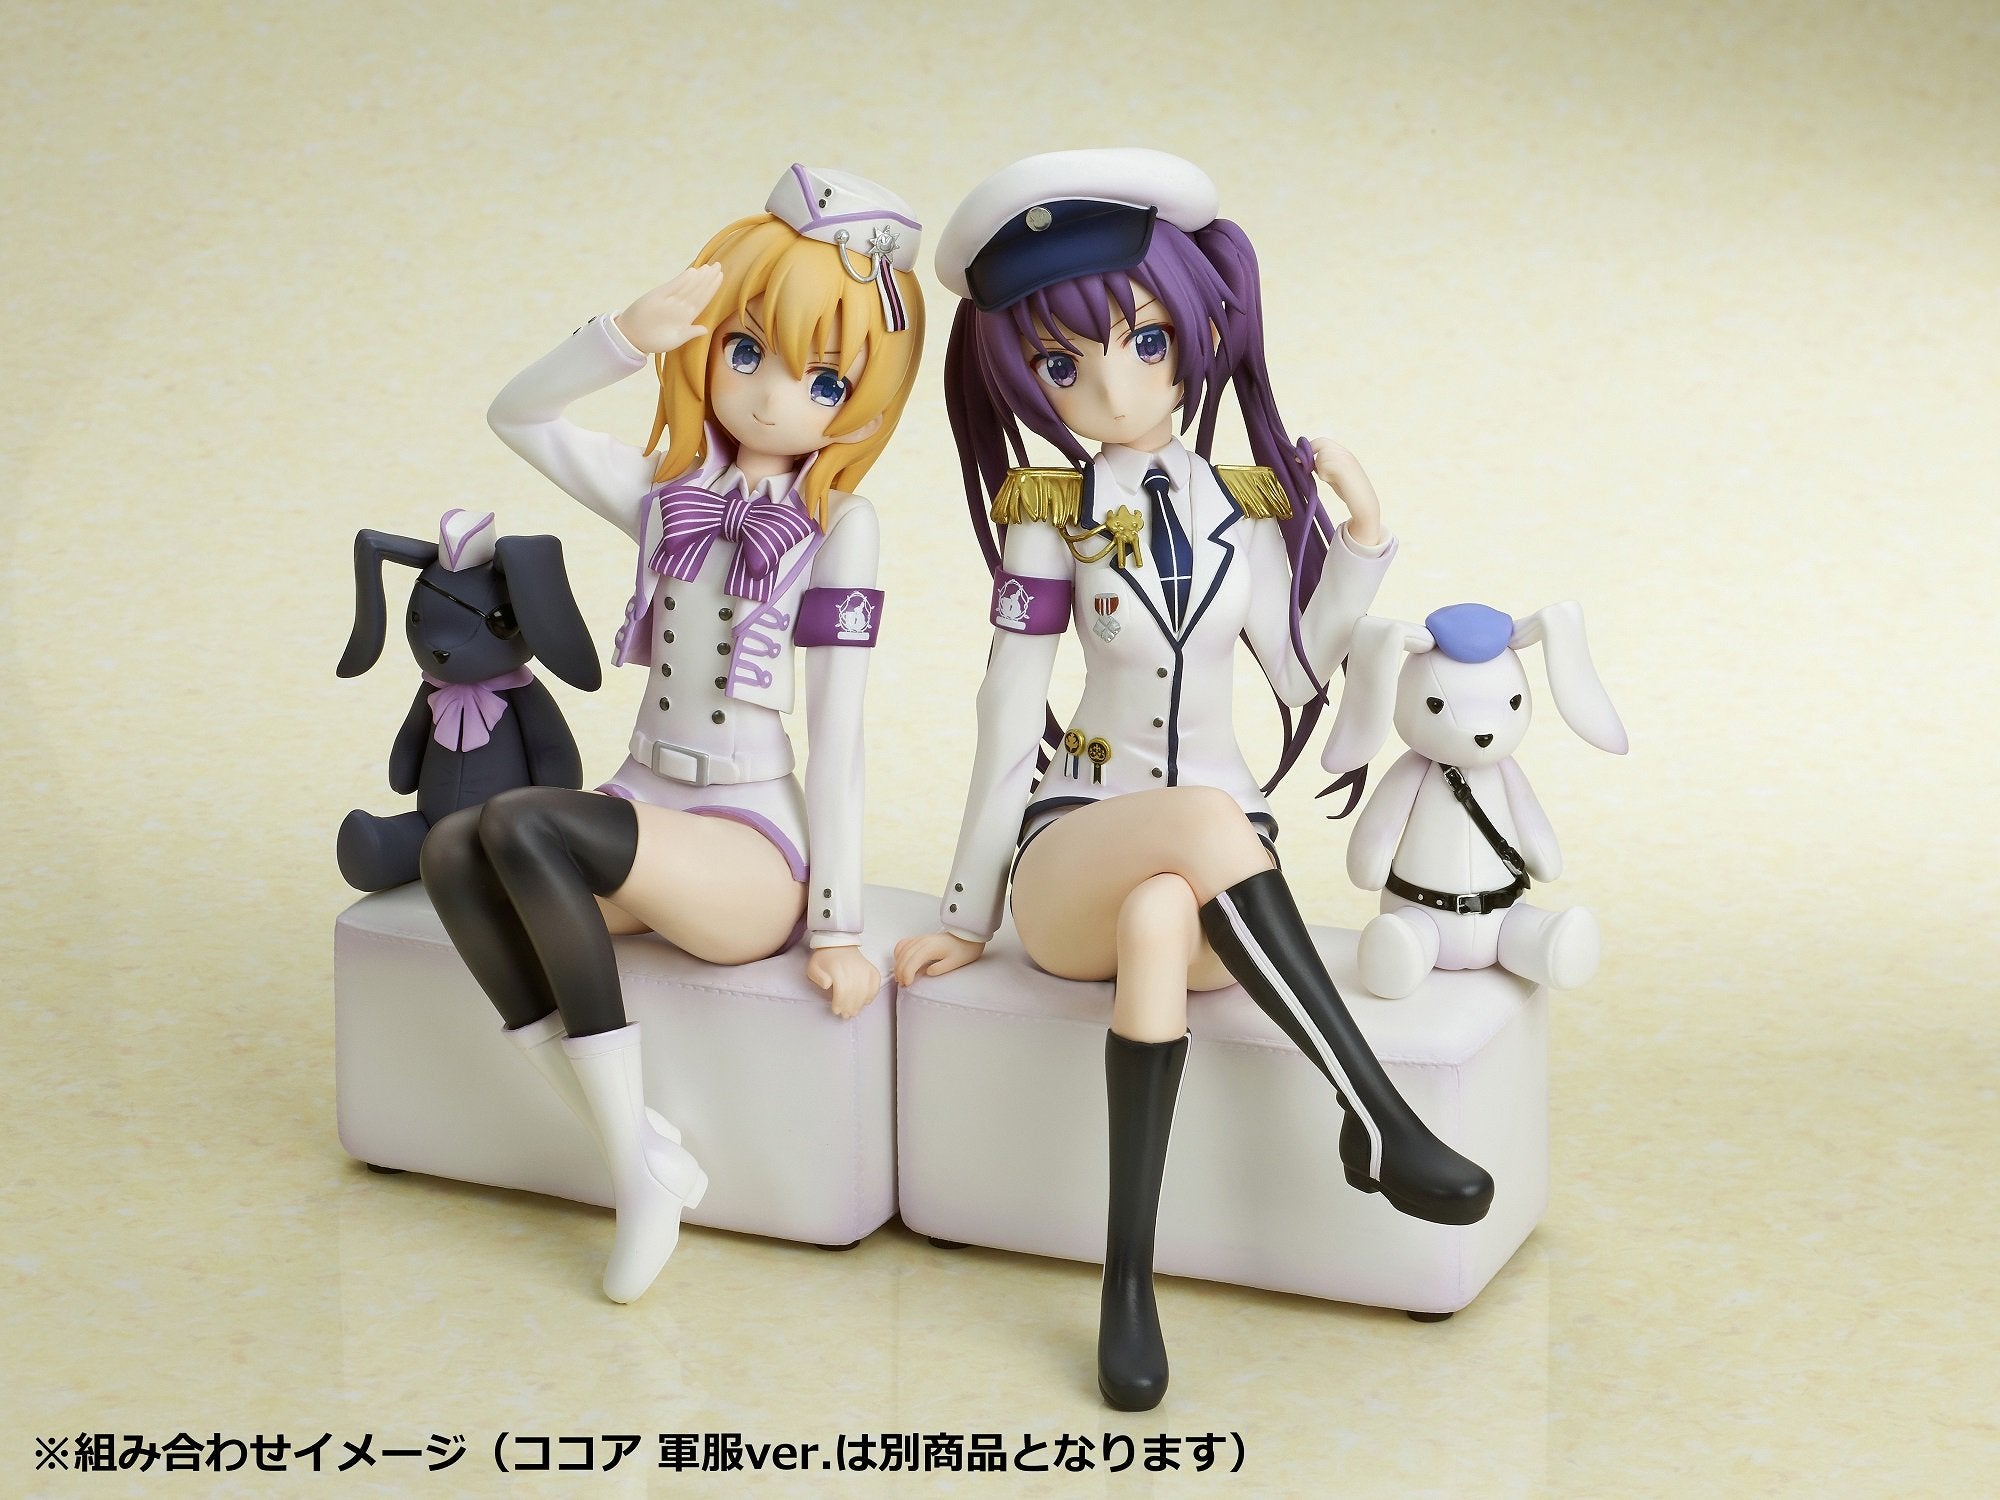 Is The Order A Rabbit? - Rize Figure (Military Uniform Ver.) image count 6